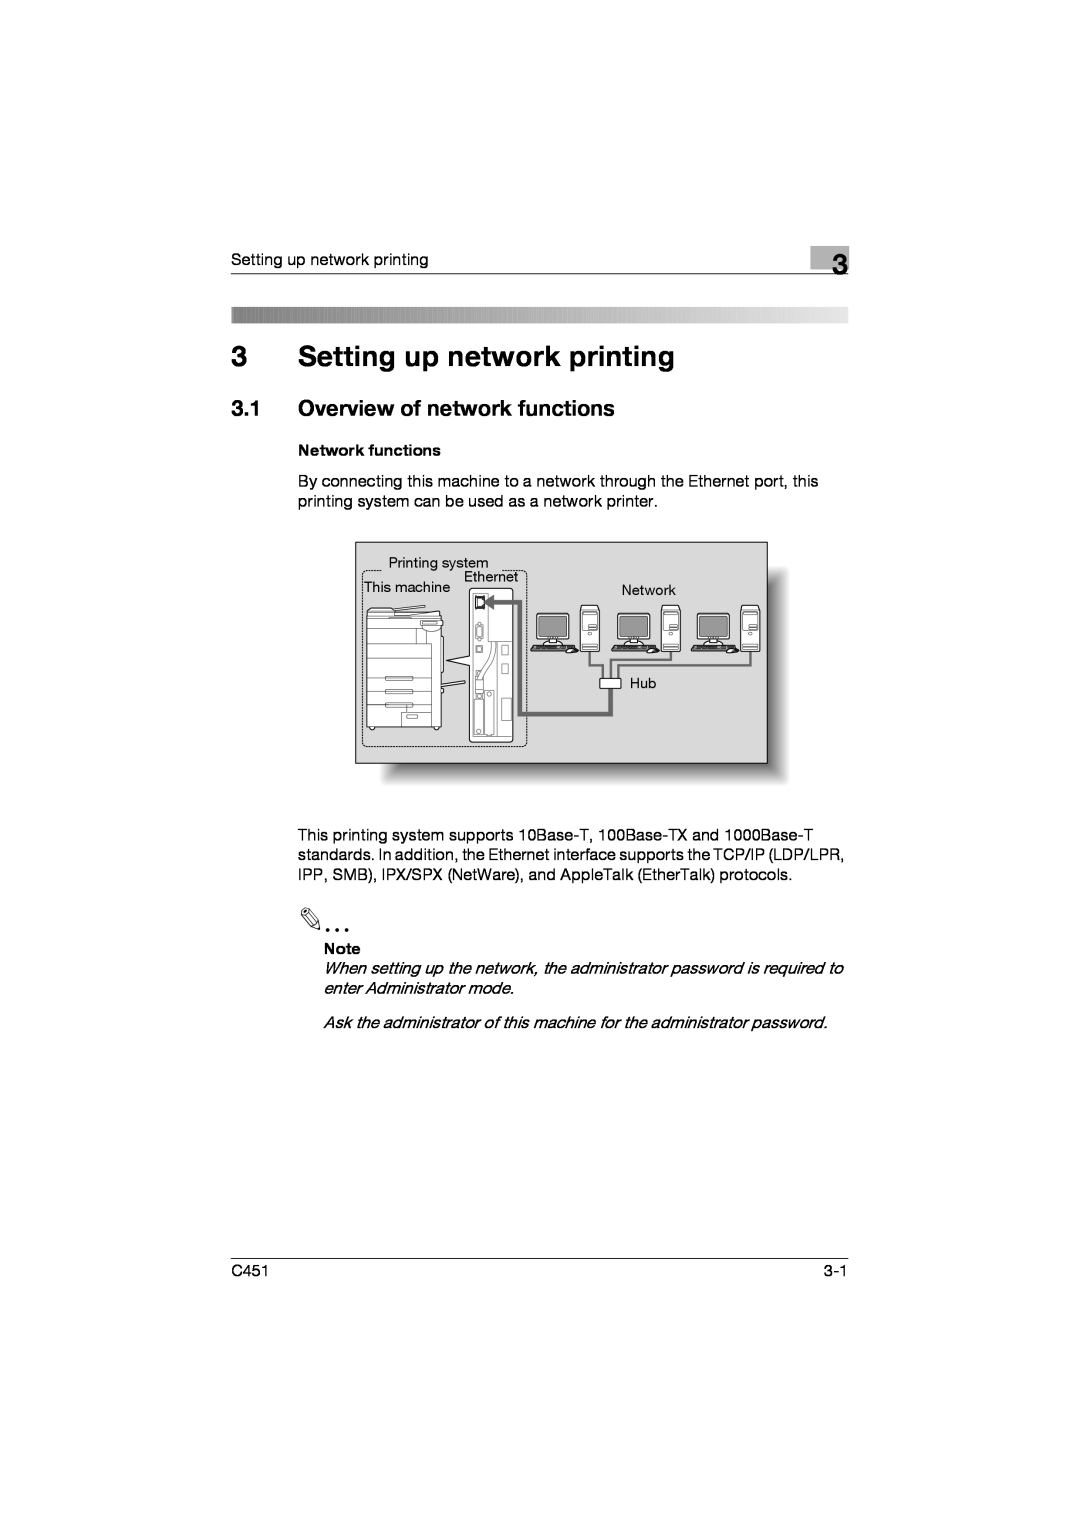 Konica Minolta C451 manual 3Setting up network printing, 3.1Overview of network functions 